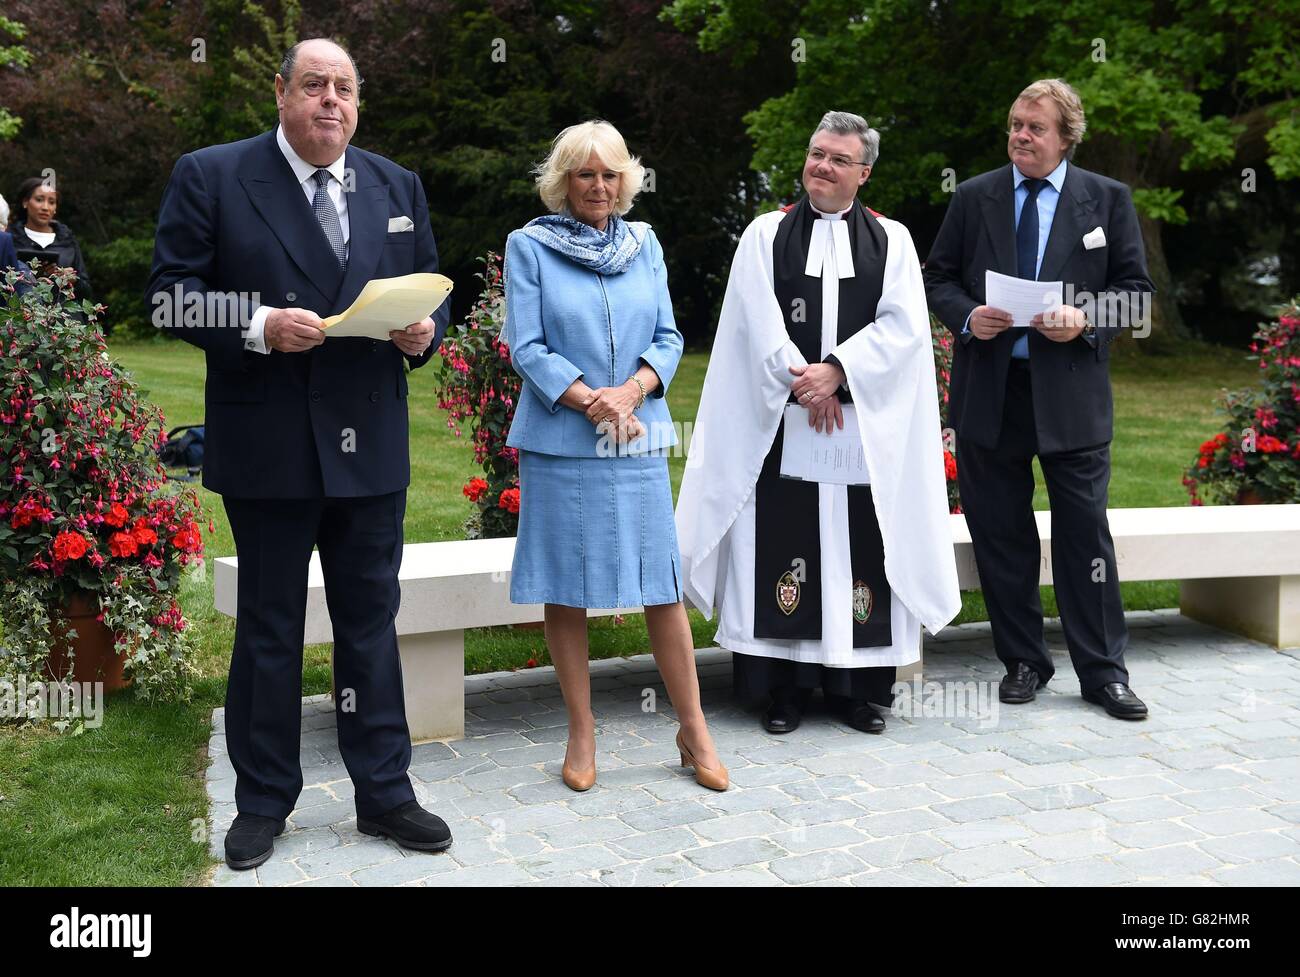 The Duchess of Cornwall (second right), the Duke of Marlborough, Jamie Spencer-Churchill (right) and the reverend Canon Adrian Daffern look on as Sir Nicholas Soames MP (left) makes a speech before the unveiling of a bust of Sir Winston Churchill int he grounds of Blenheim Palace, Oxfordshire. Stock Photo